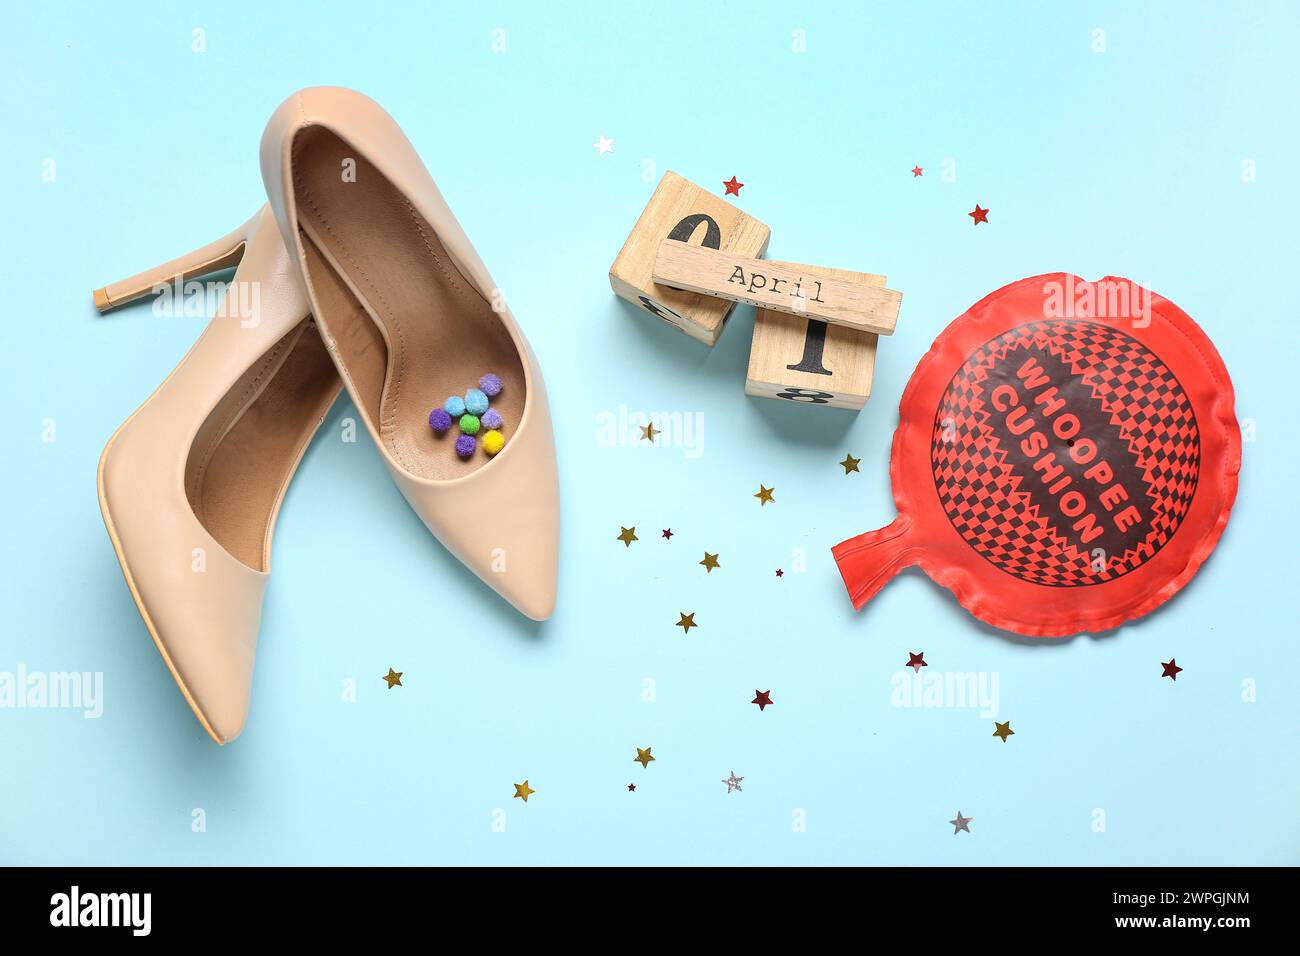 High heel shoes with calendar, whoopee cushion and decor on blue background. April Fools Day Stock Photo